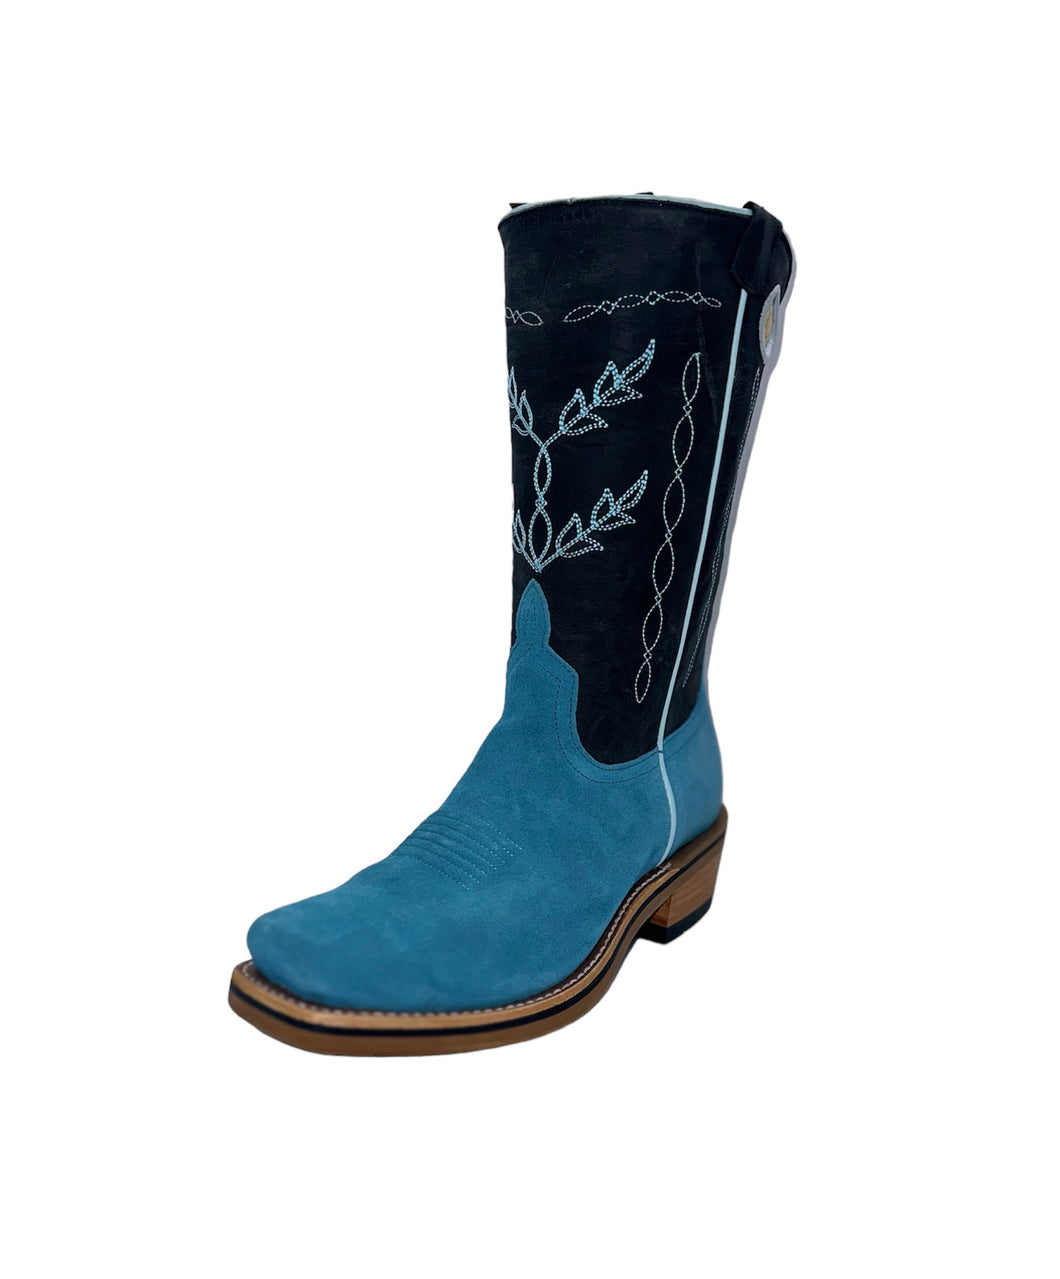 Horsepower Men's High Noon Turquoise Sueded Boot